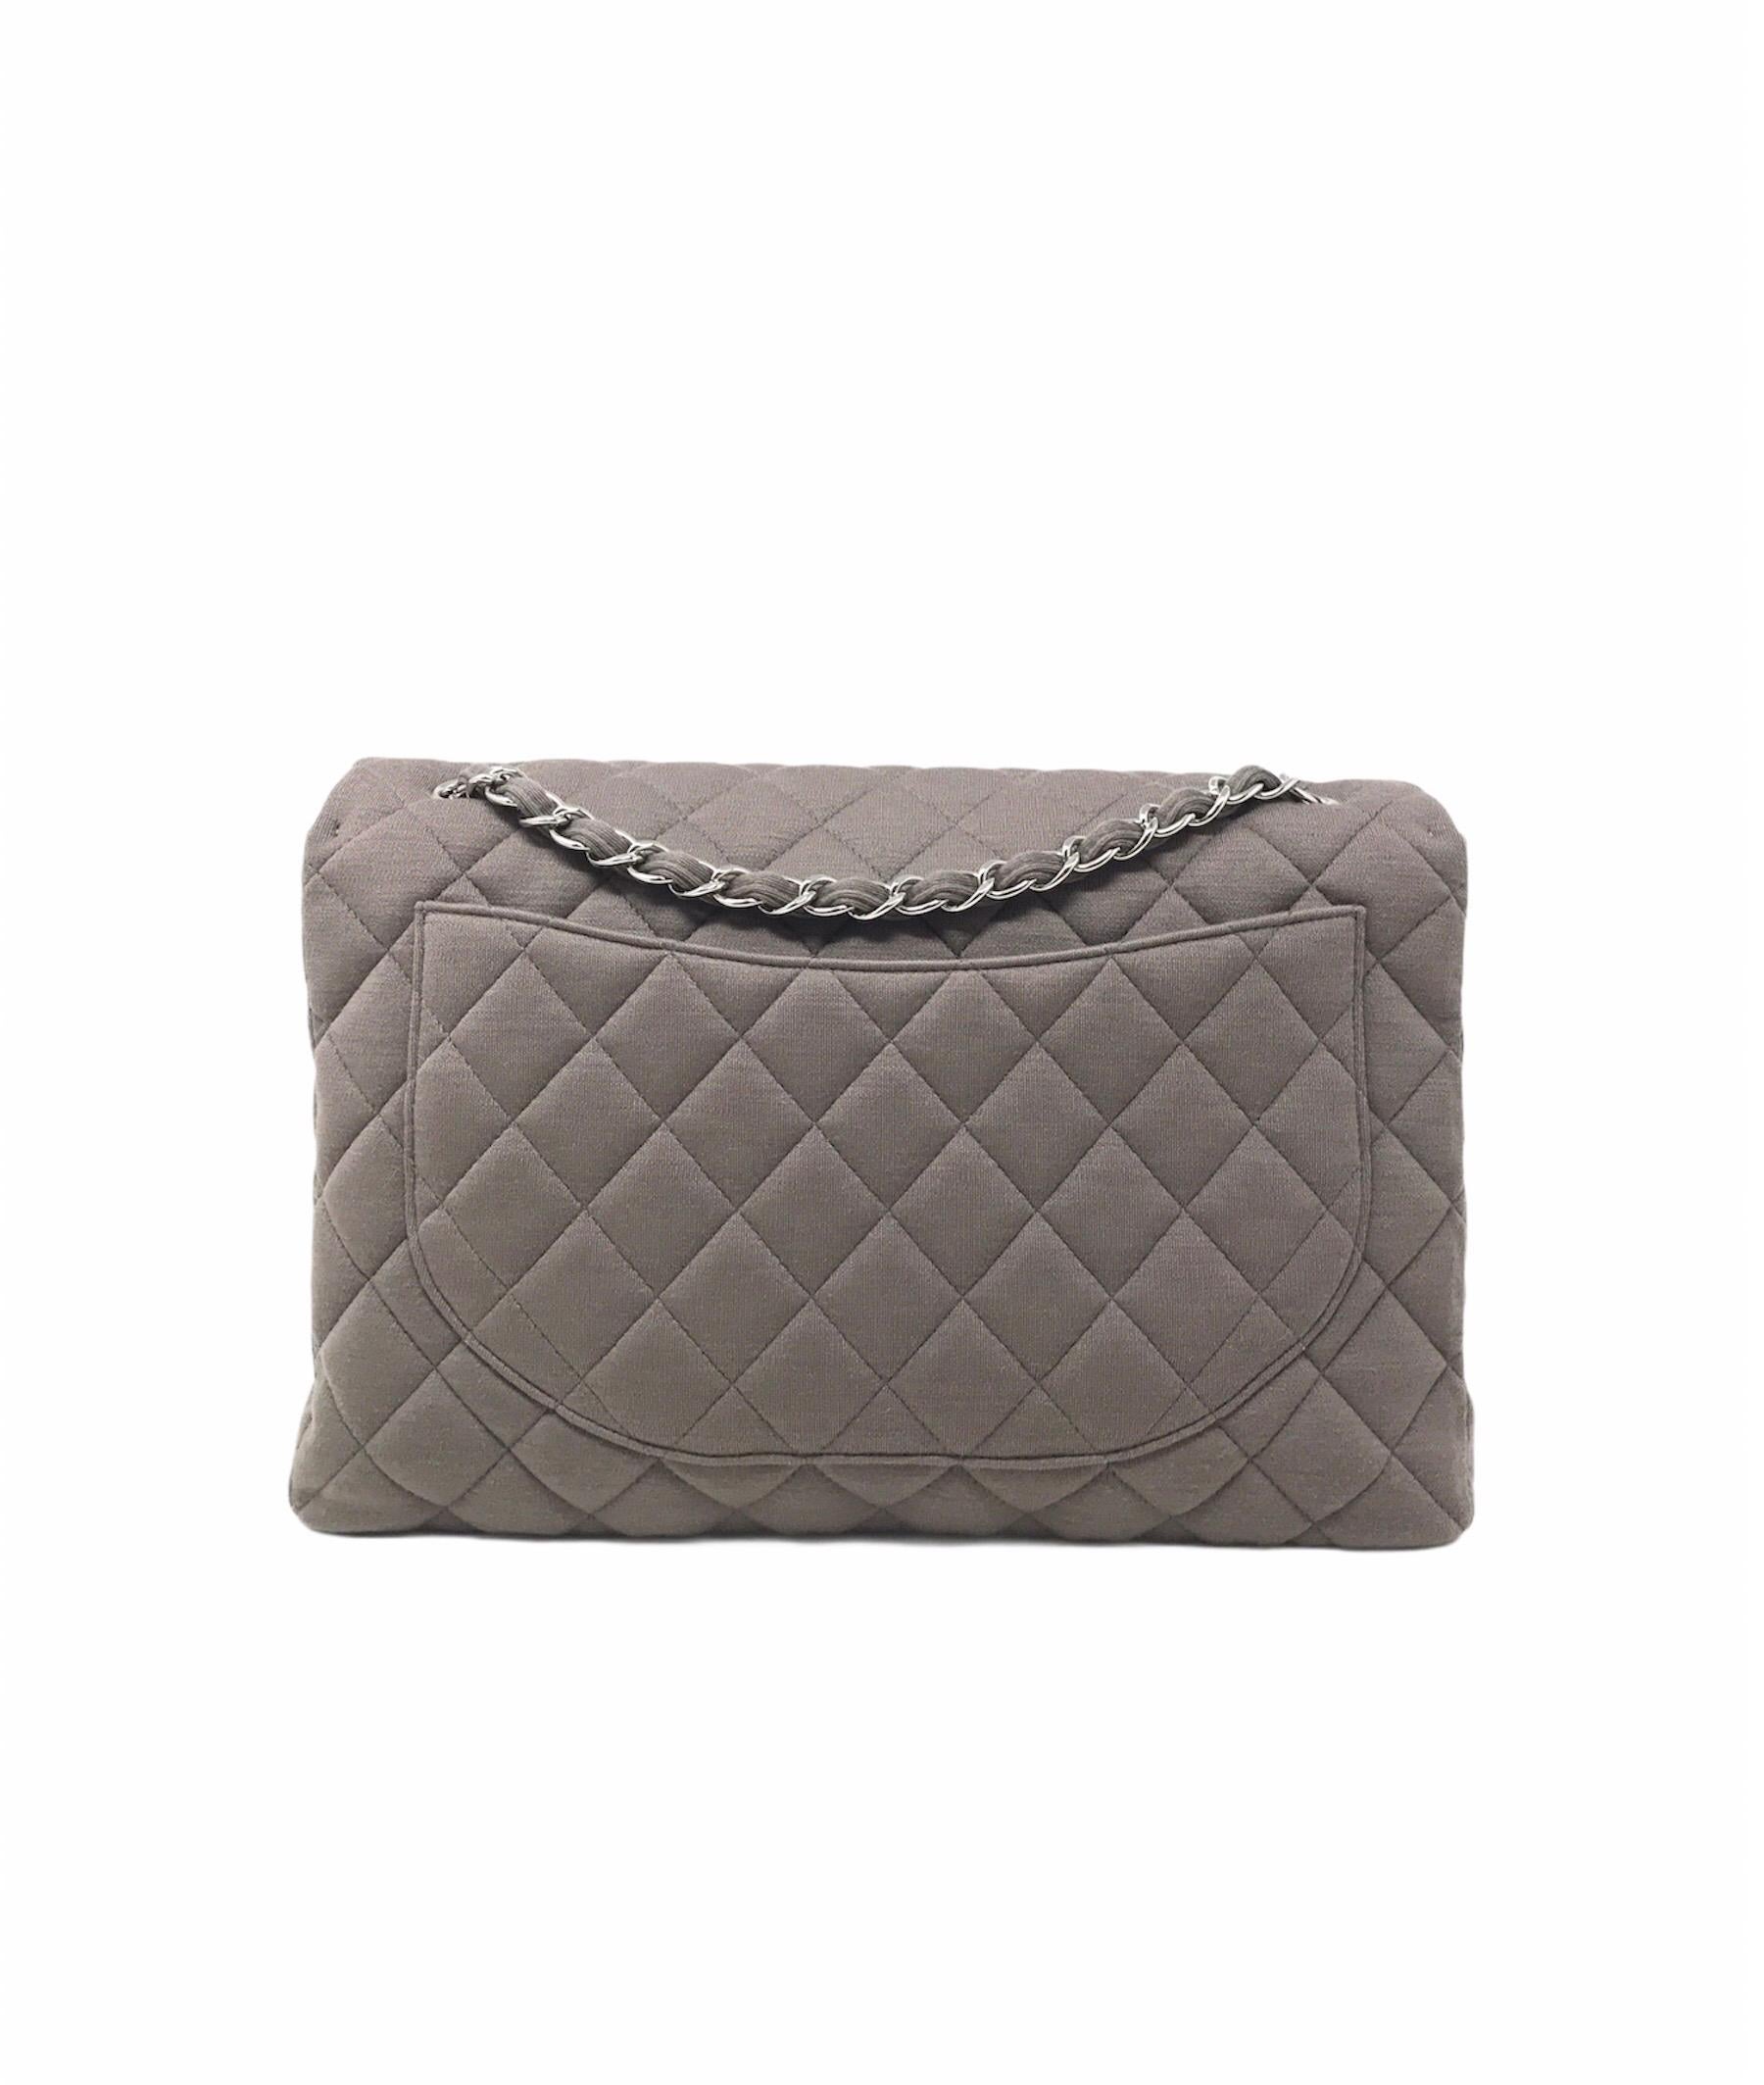 Chanel Jumbo bag in grey cotton. Year of production 2011 code 13xxxxx . Excellent condition is not equipped with card but has the internal hologram, it is carried by hand or crossbody, hdw silver. Complete with its dust bag has only one very